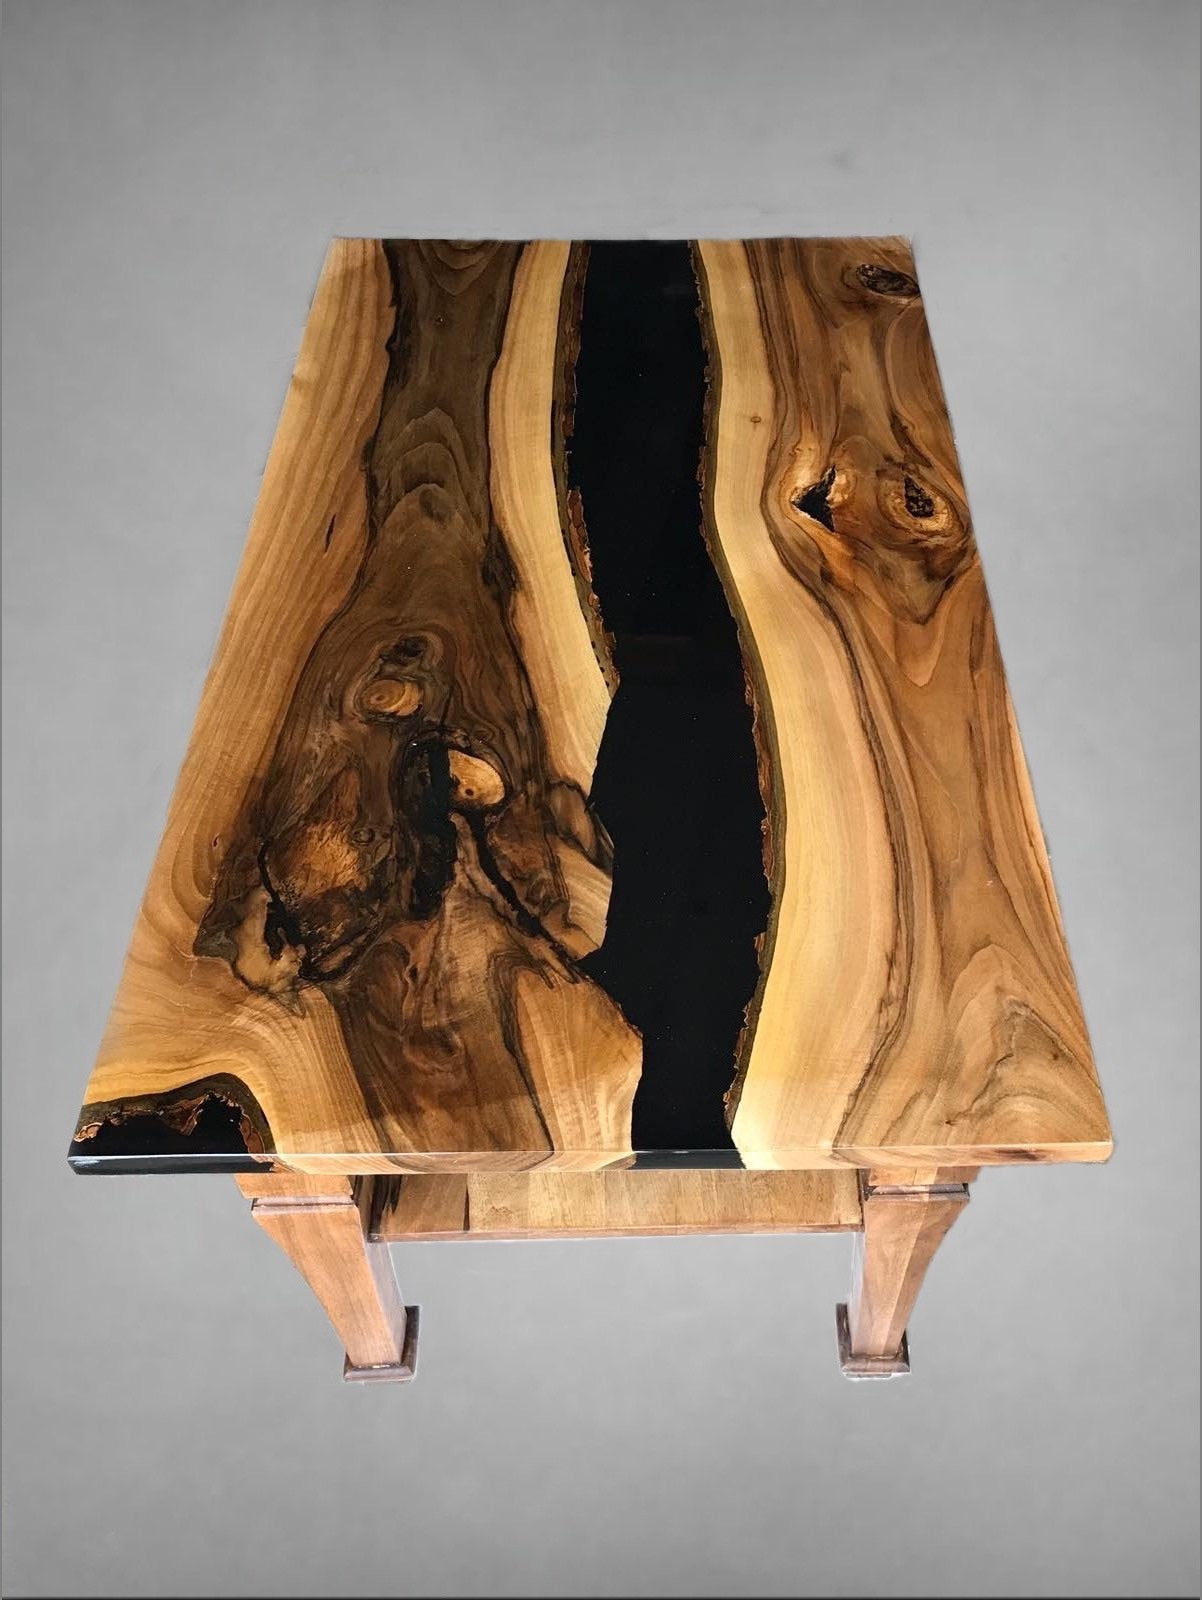 Epoxy table, live edge table, resin river, slab table, epoxy resin table, burl table, natural edge, tree trump table, natural reclaimed, axe